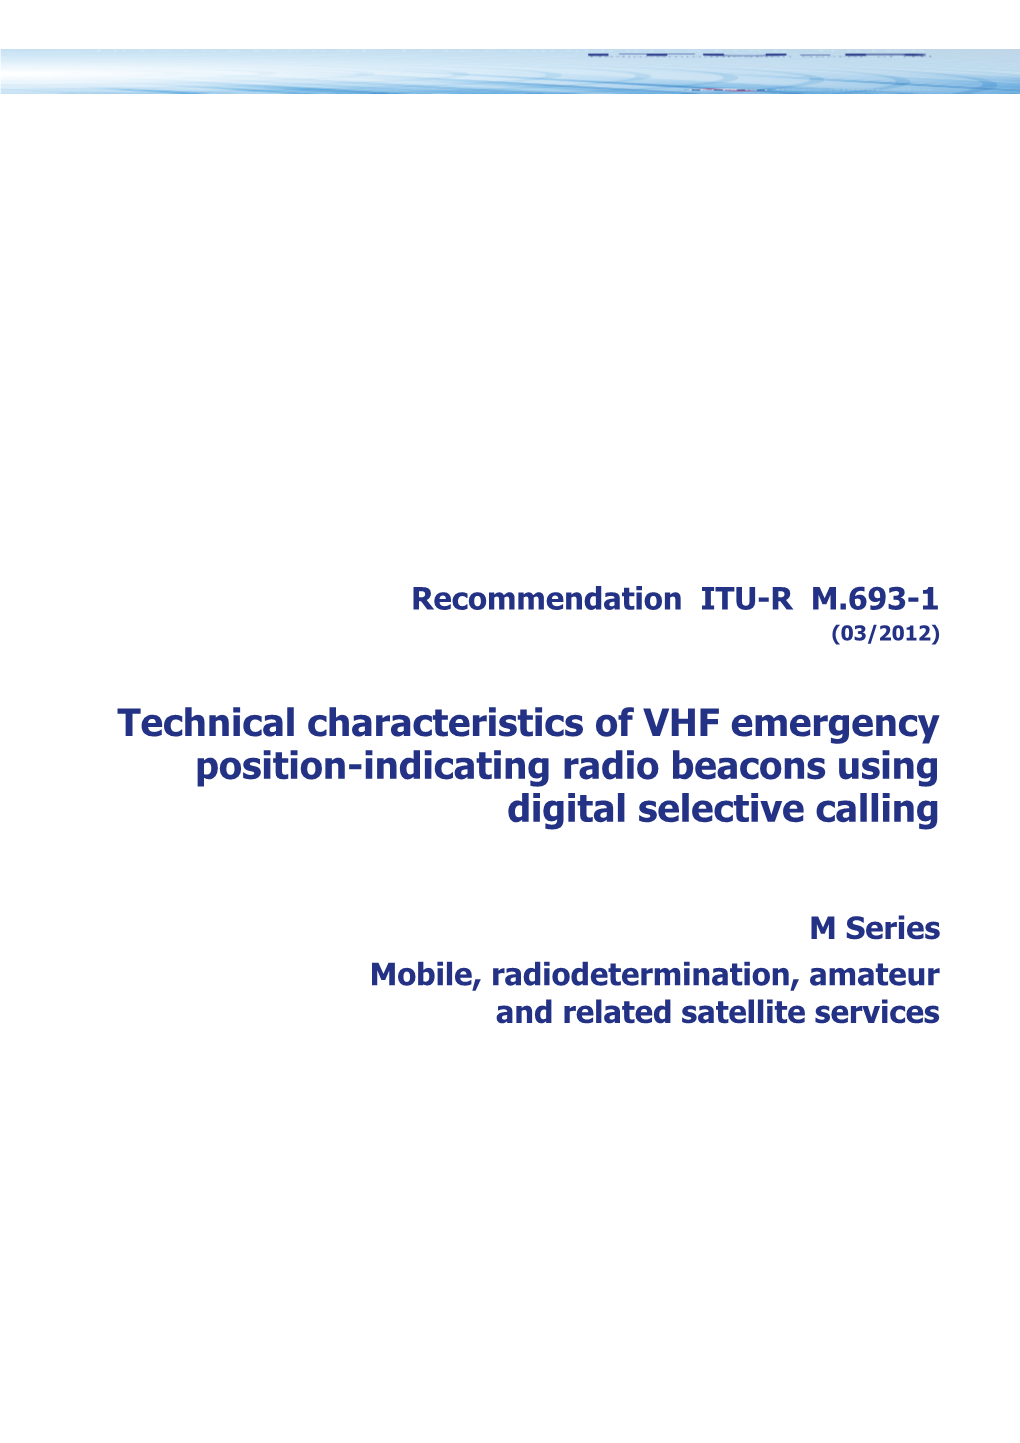 RECOMMENDATION ITU-R M.693-1 - Technical Characteristics of VHF Emergency Position-Indicating